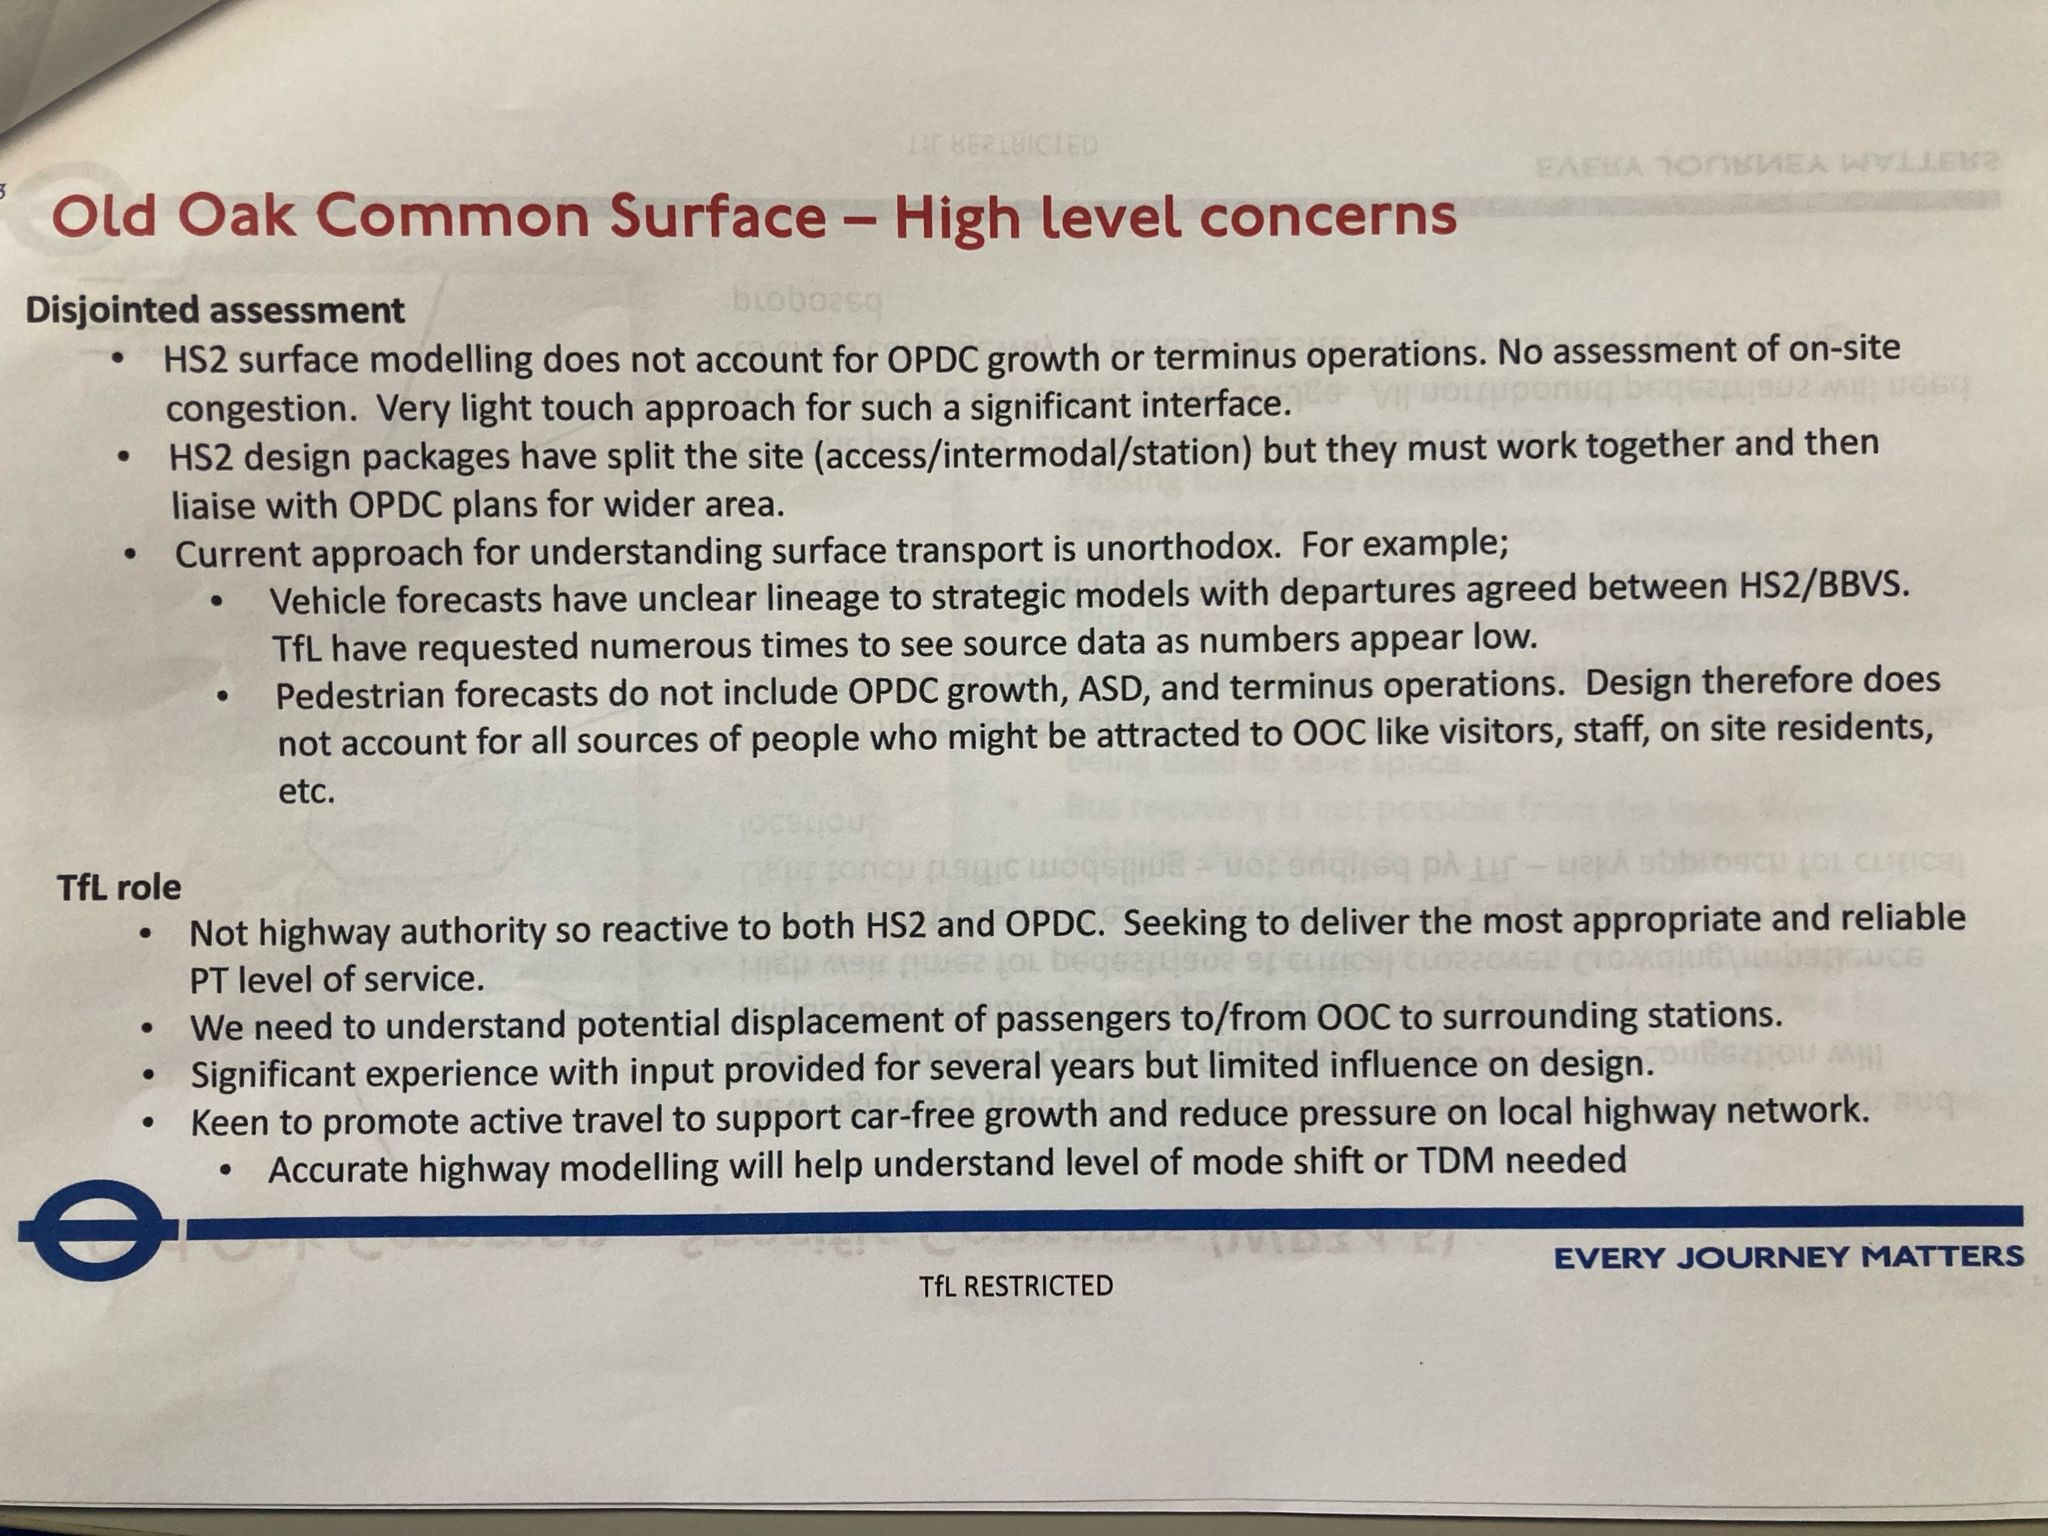 A TfL document headed Old Oak Common Surface - High Level Concerns